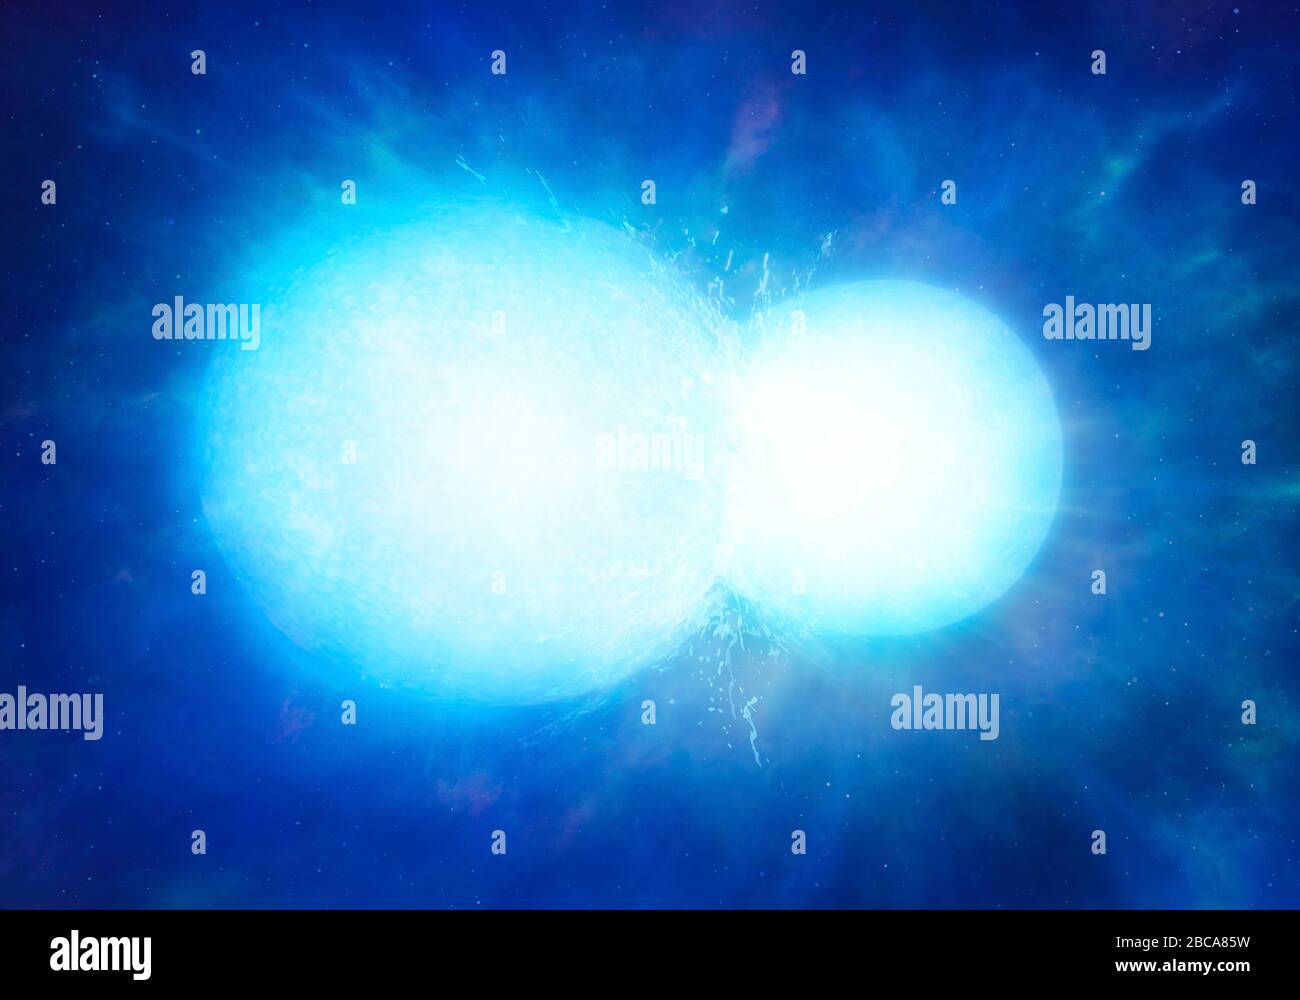 An image showing the collision of two white dwarfs, which will eventually merge to form a single, larger star. A team led by Mark Hollands, of Warwick University, discovered a white dwarf with bizarre characteristics, such as a very high mass, a high speed through the galaxy, and high levels of carbon in its atmosphere. They conclude that the object resulted from the merger of two more normal white dwarfs. Stock Photo